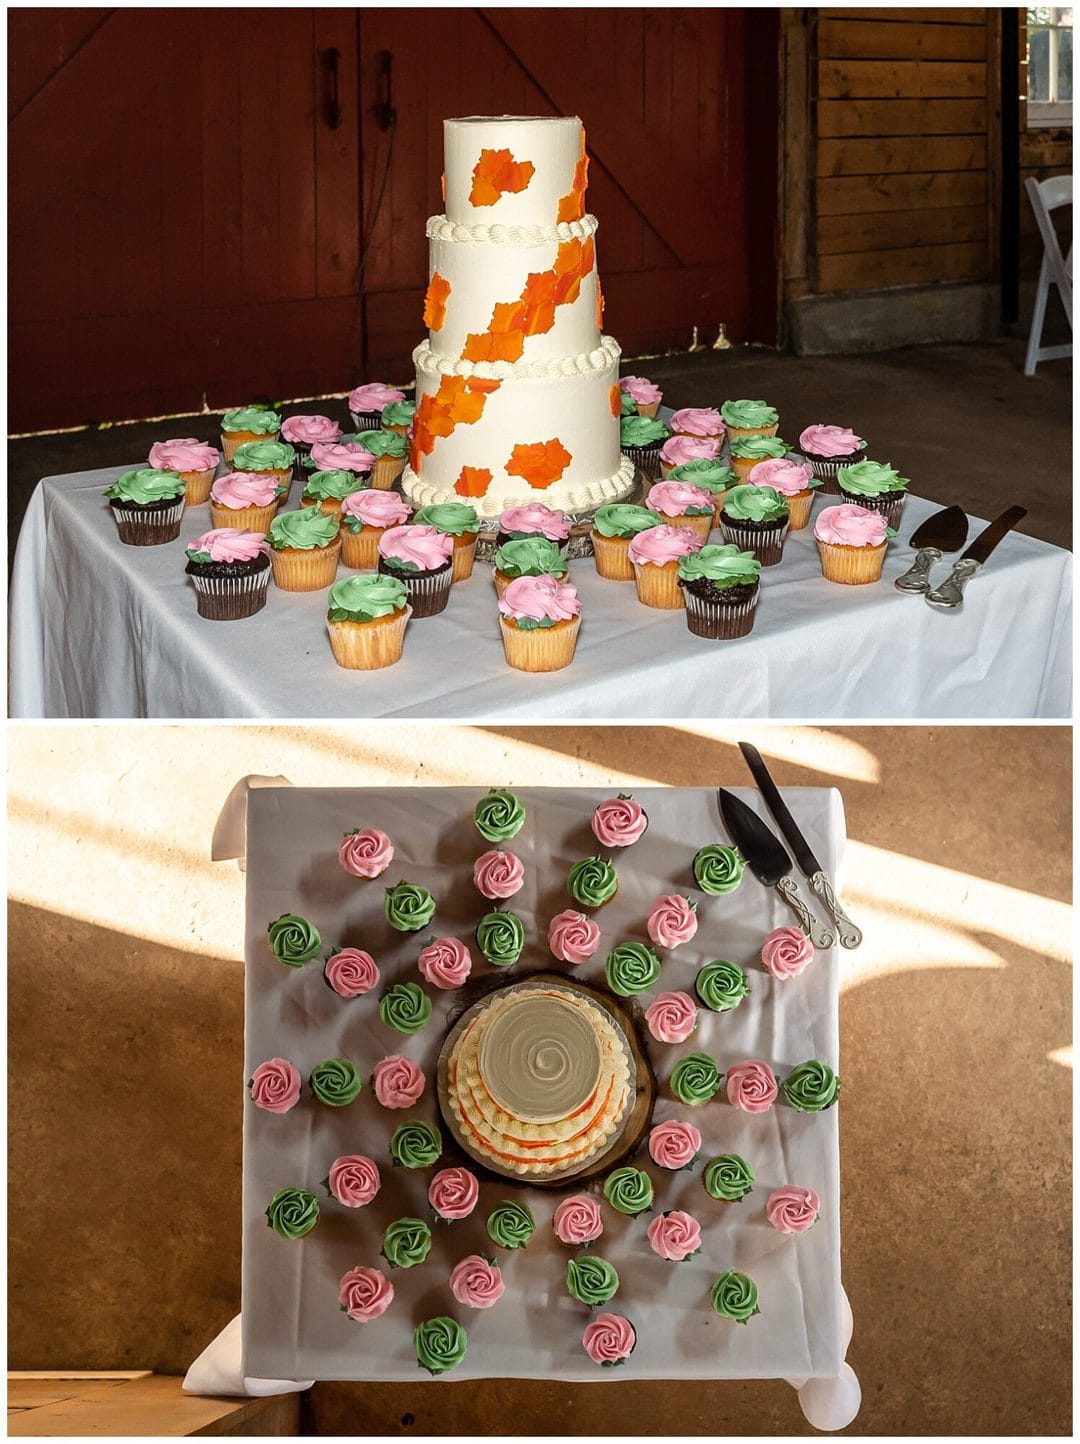 An aerial shot of the wedding cake with cupcakes at a wedding at the Kinley Farm's barn in Lunenburg, NS.